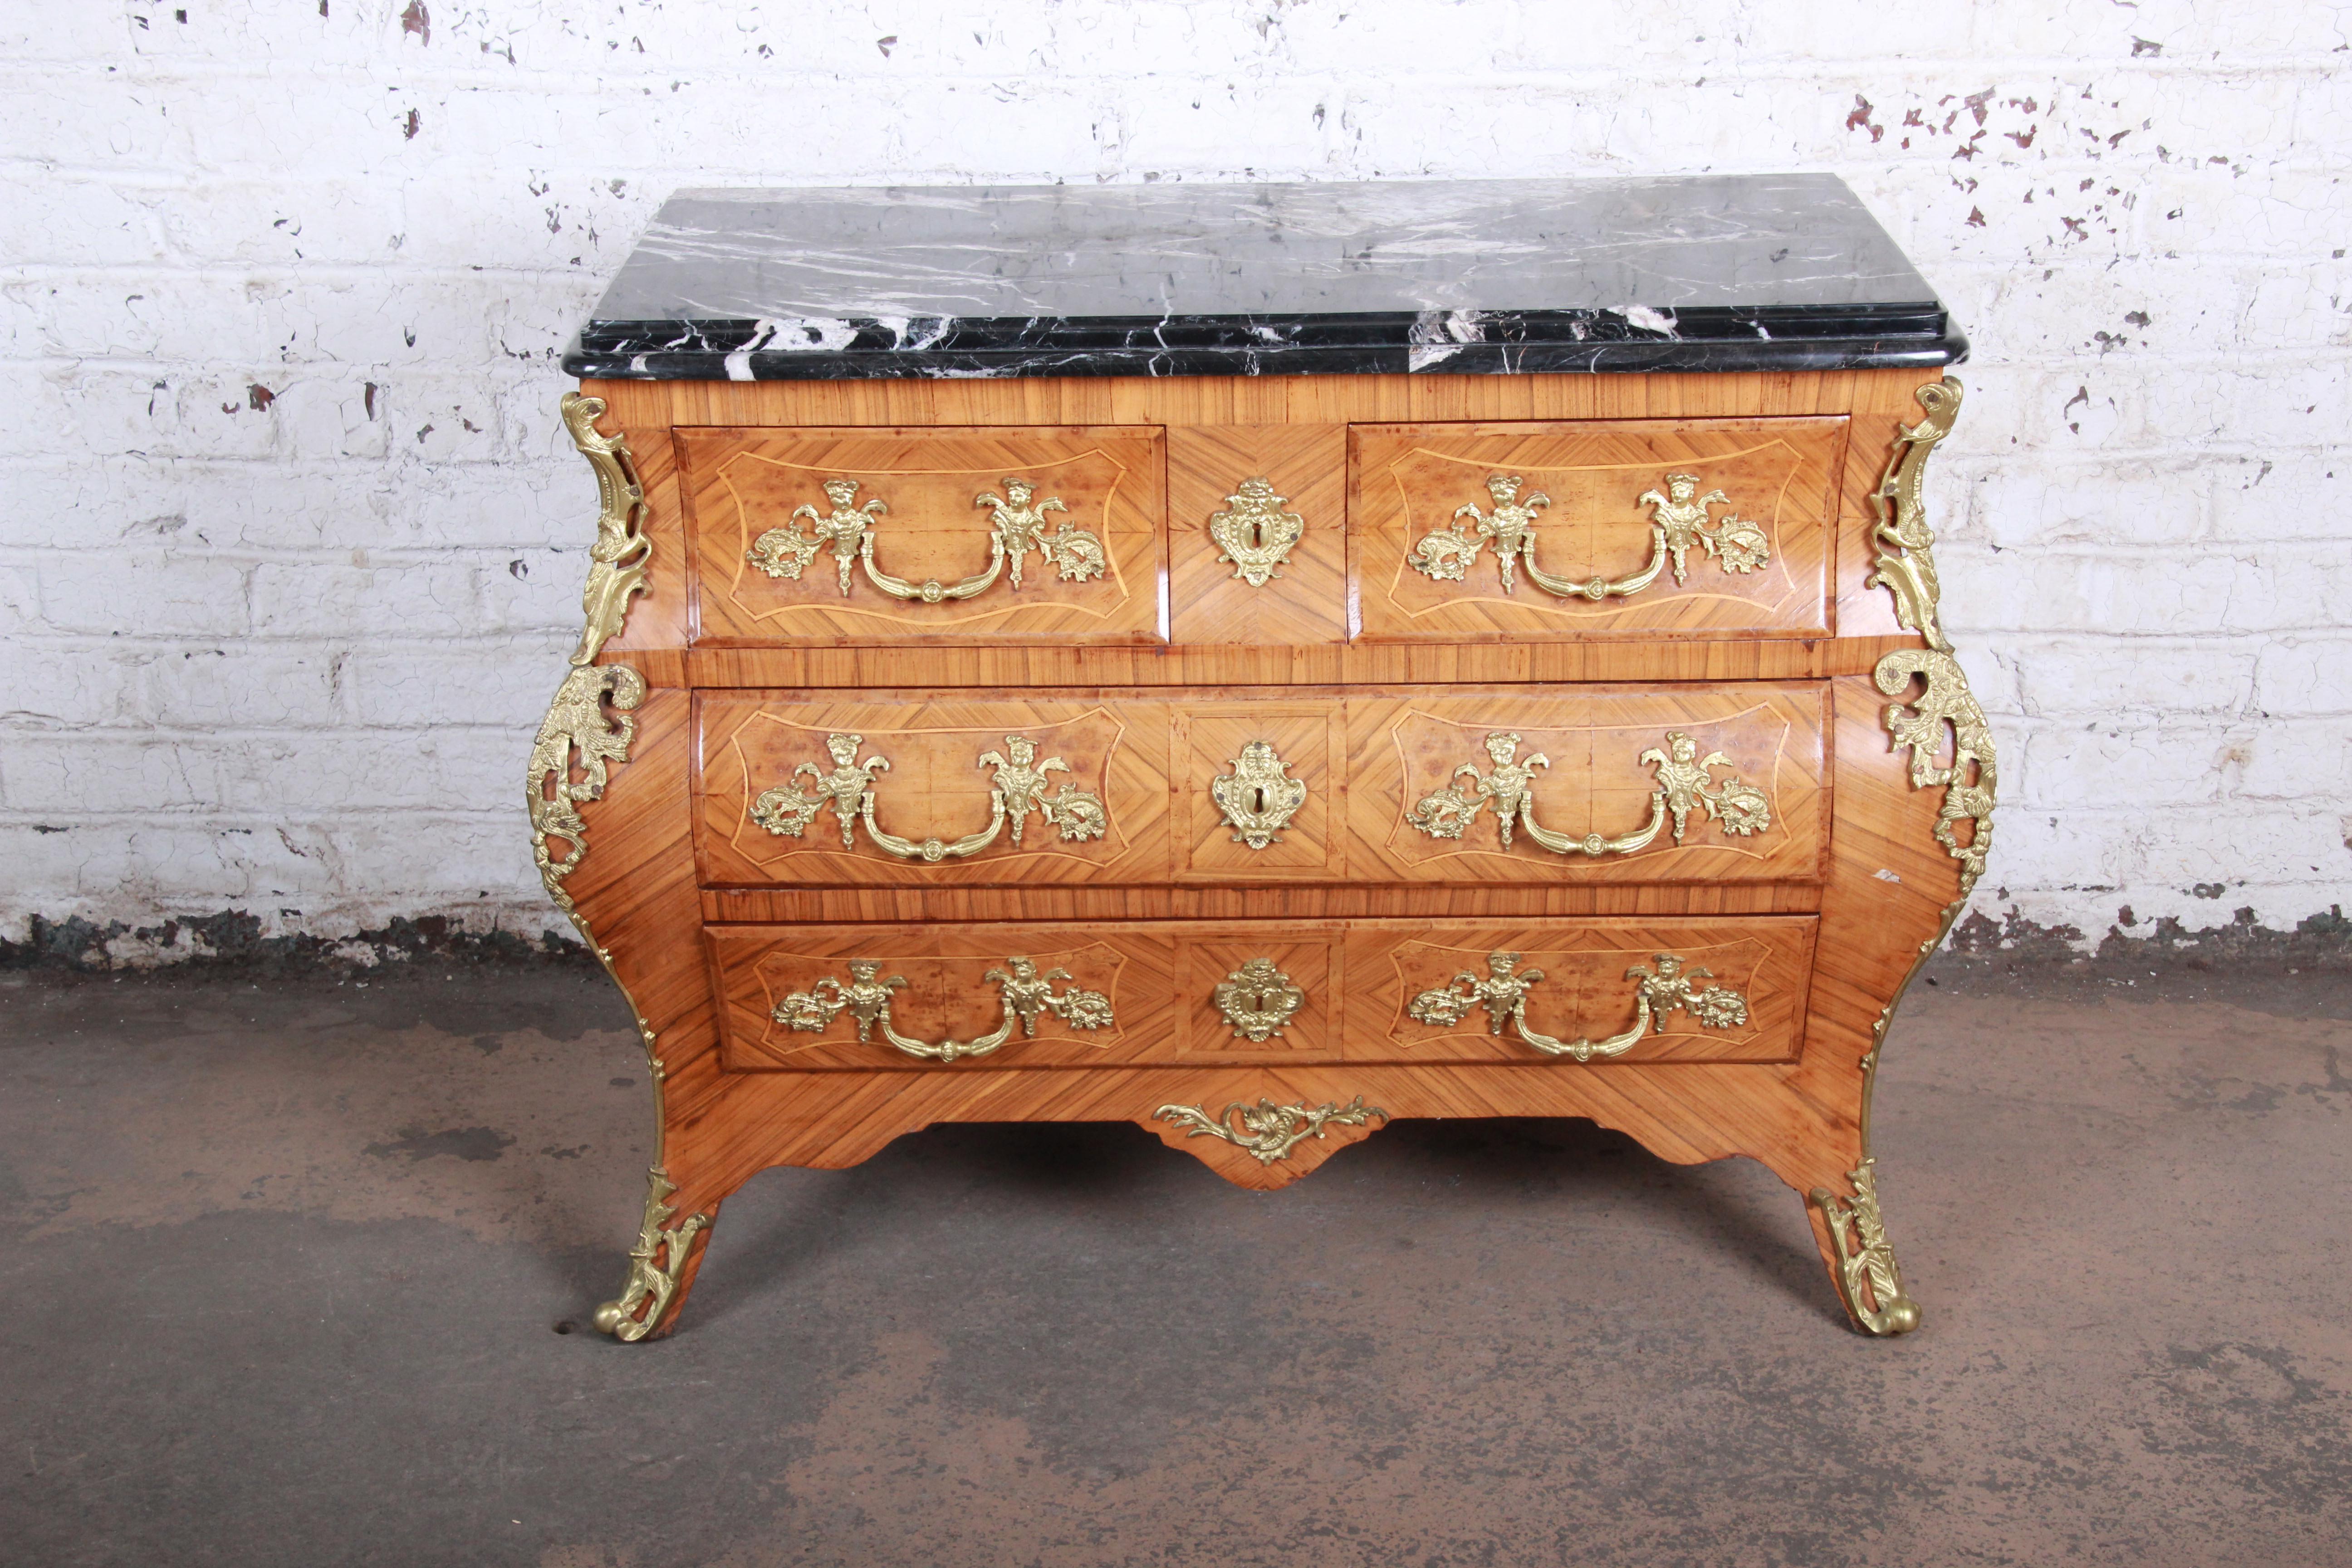 An exceptional French Louis XV style mahogany Bombay chest or commode. The chest features stunning mahogany wood grain with satinwood string inlays and inlaid burl wood. It has ornate mounted ormolu and an incredible 1.75